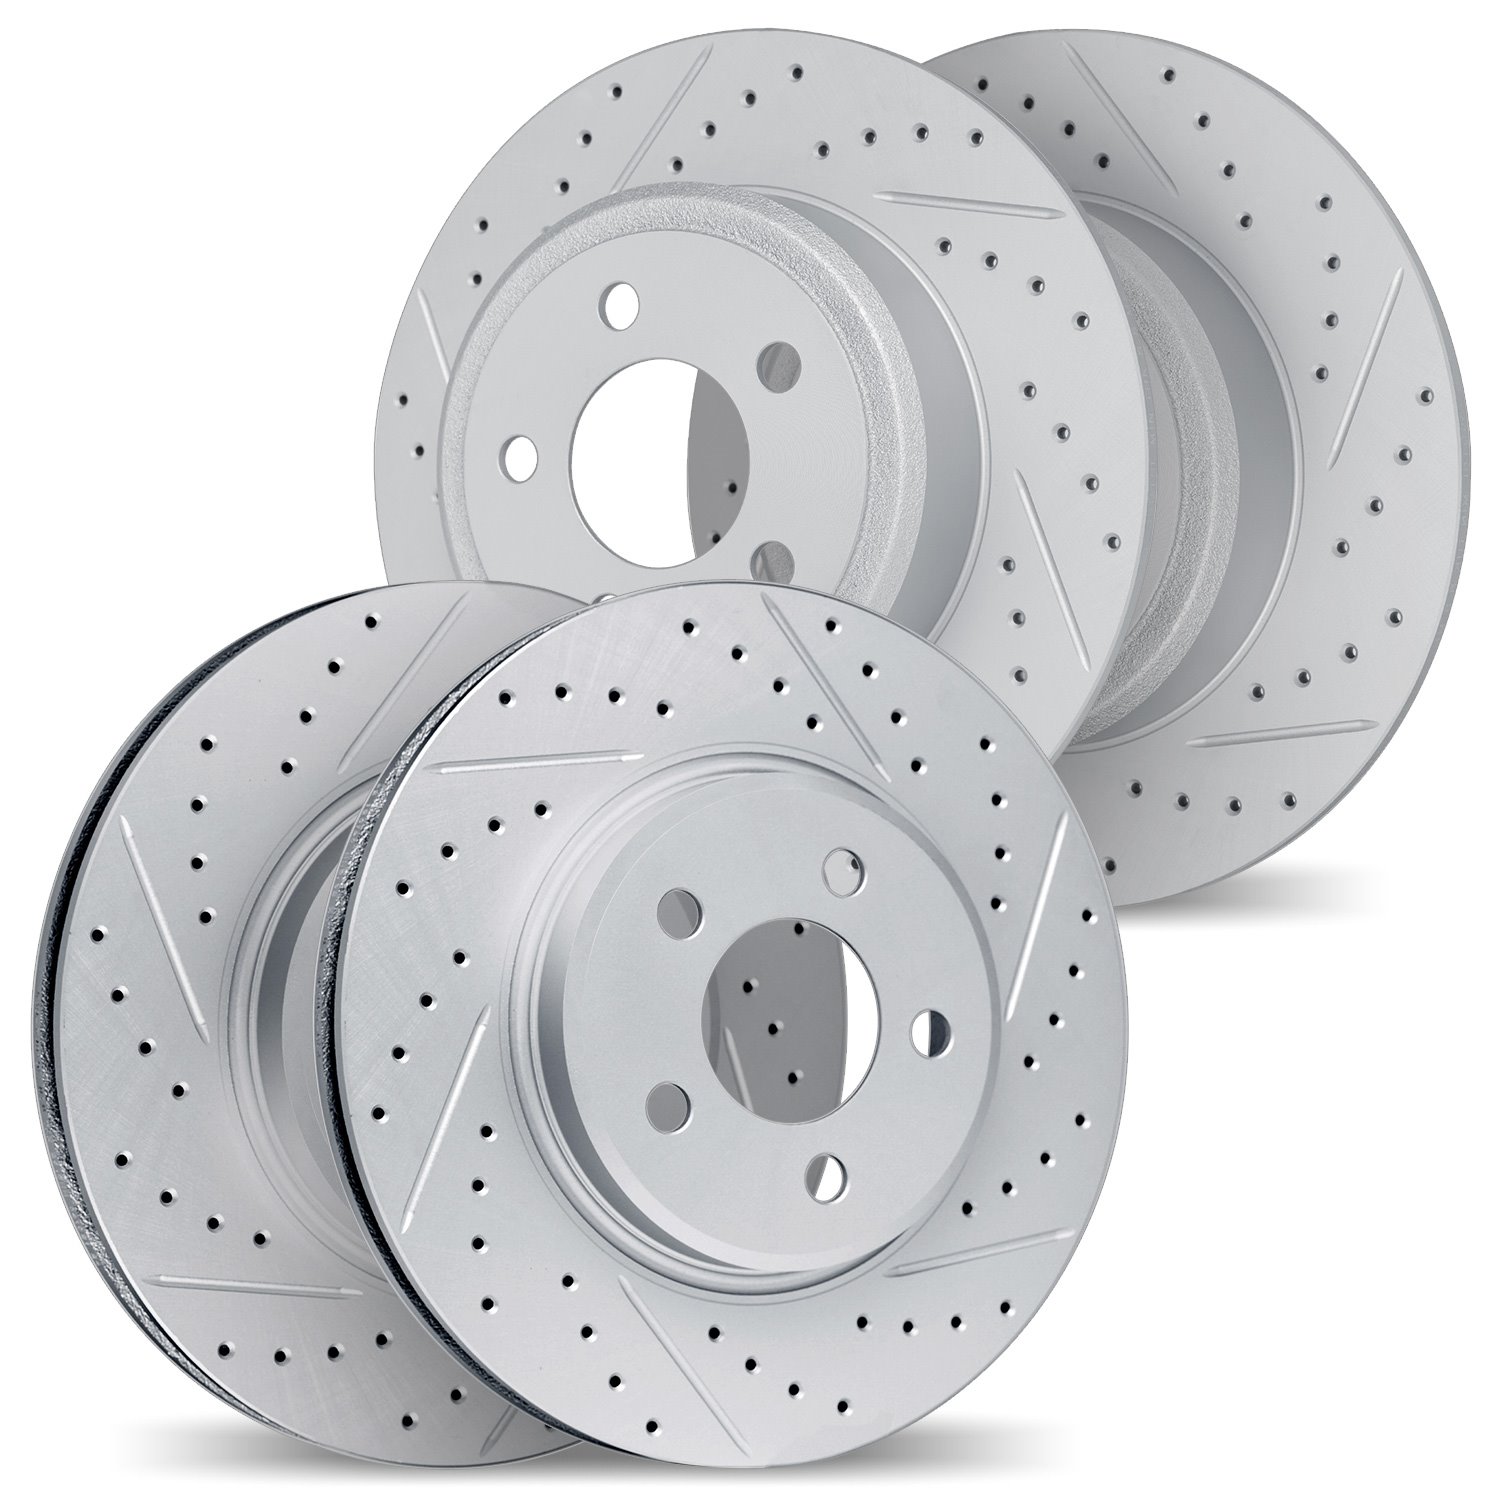 2004-03022 Geoperformance Drilled/Slotted Brake Rotors, Fits Select Kia/Hyundai/Genesis, Position: Front and Rear